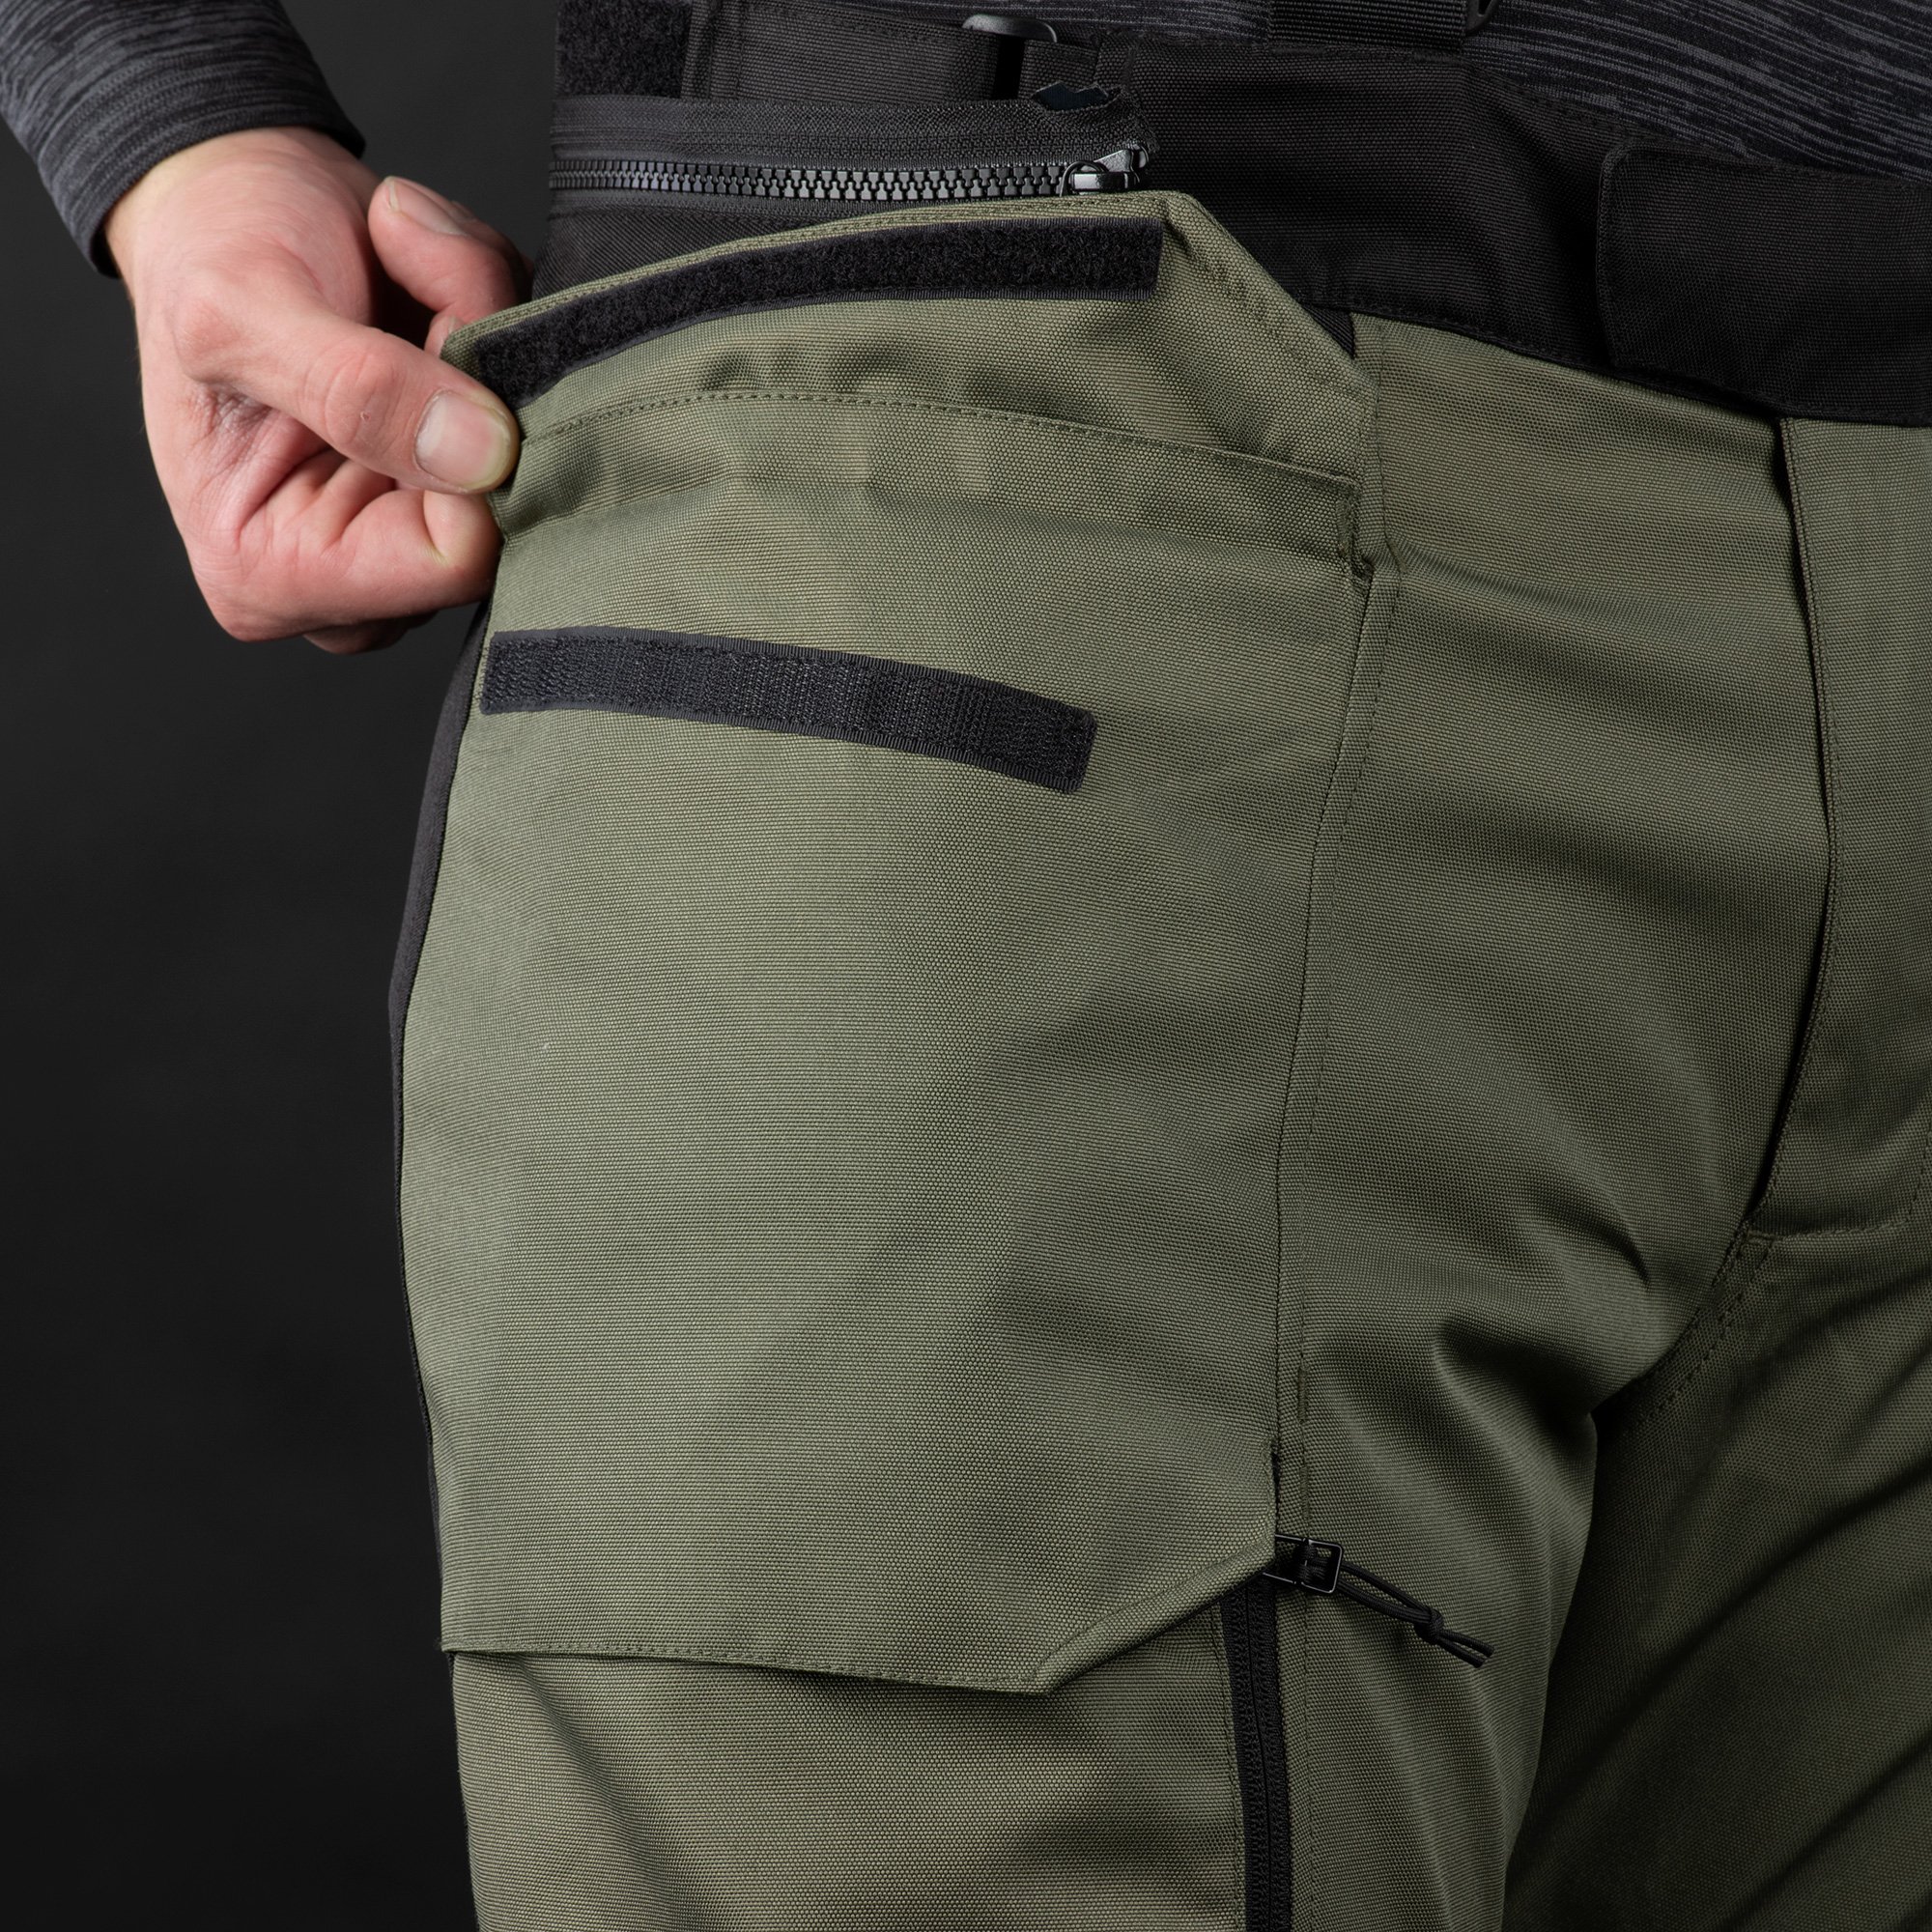 Rockland MS Pant Khaki/Blk/Fluo R : Oxford Products